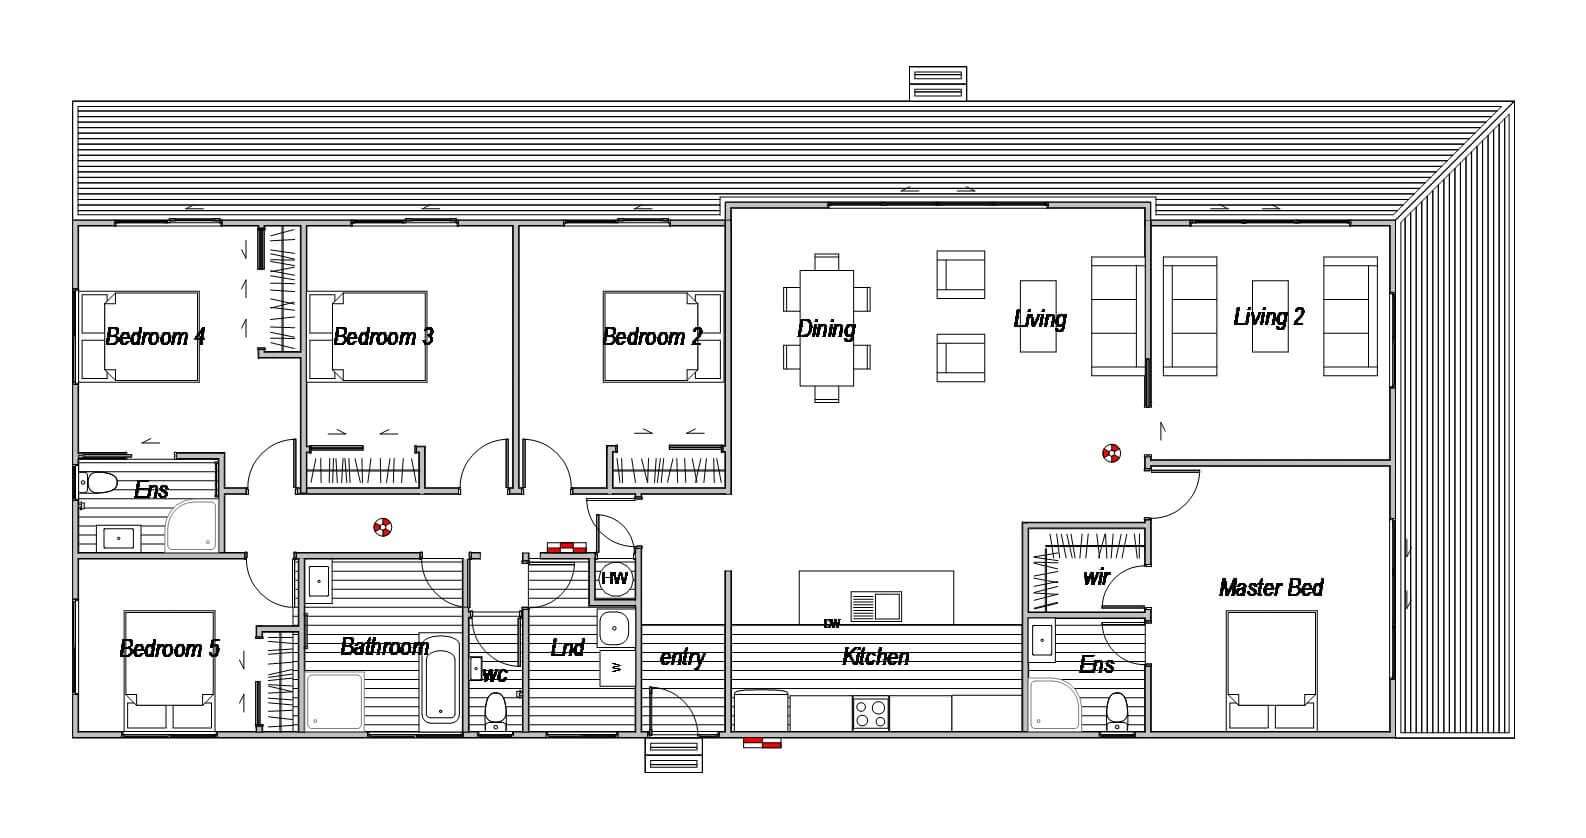 5 bedroom house layout